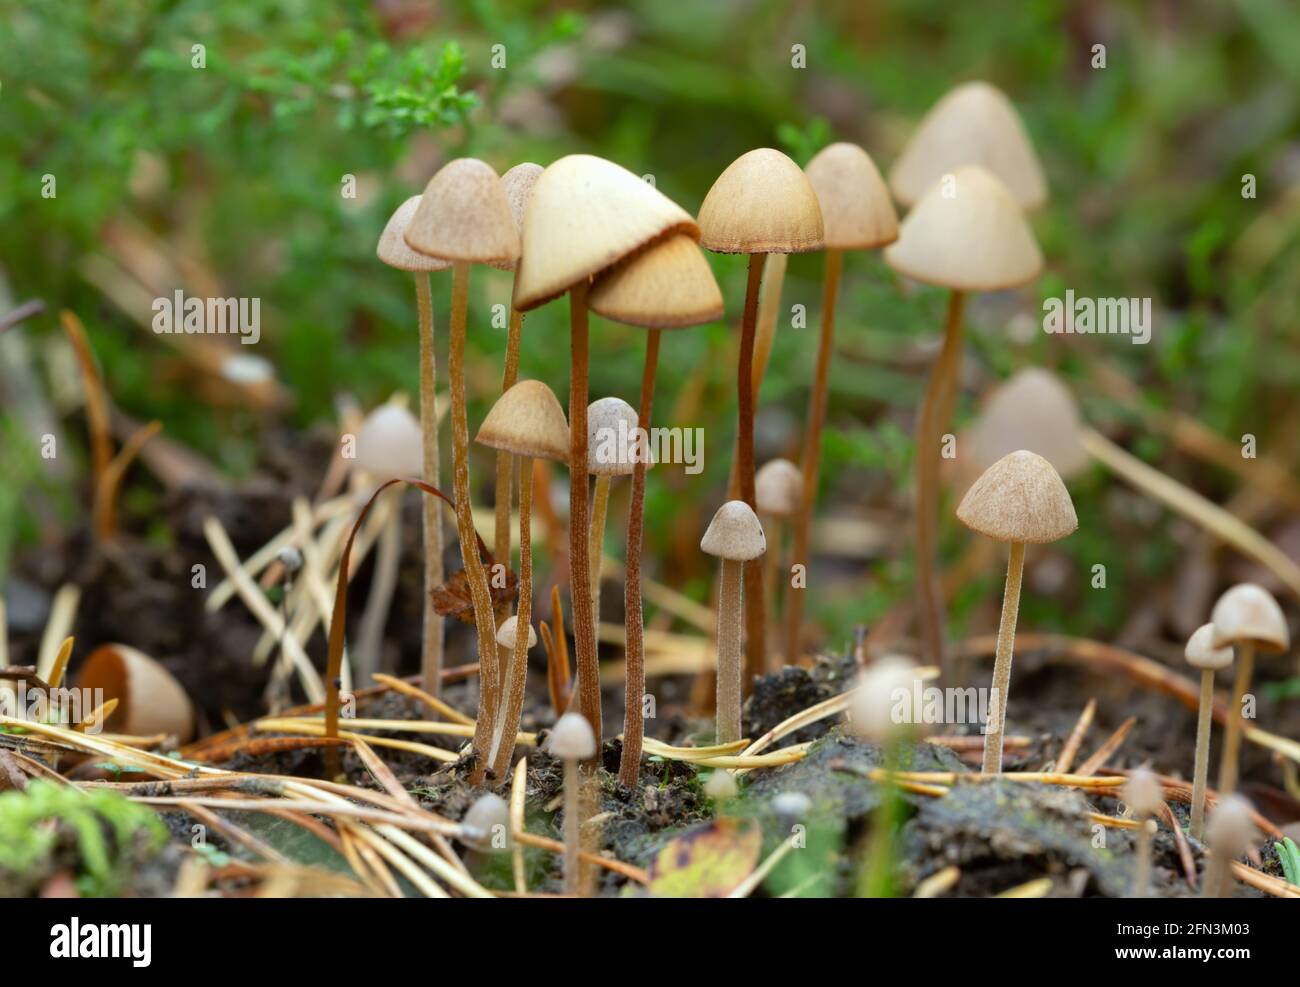 Conocybe mushrooms growing on dung Stock Photo